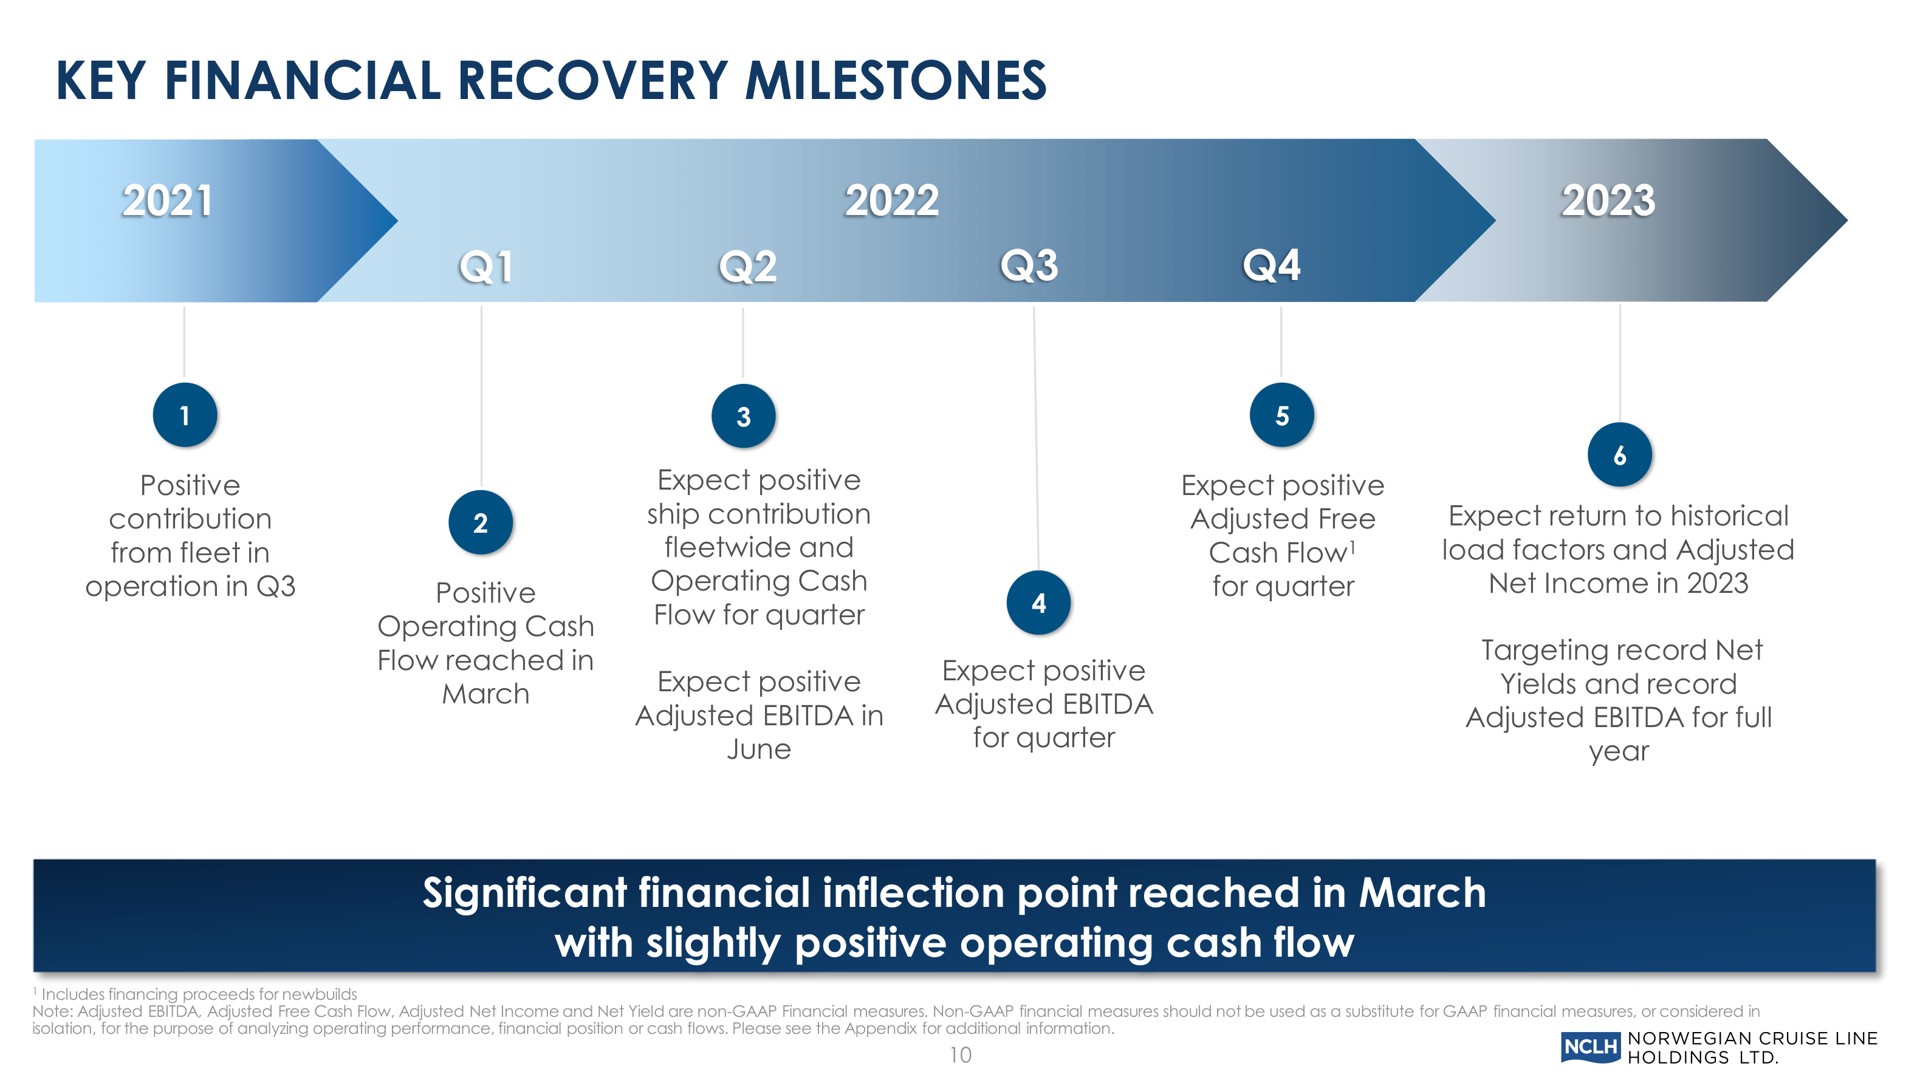 key financial recovery milestones significant financial inflection point reached in march with slightly positive operating cash flow | Norwegian Cruise Line